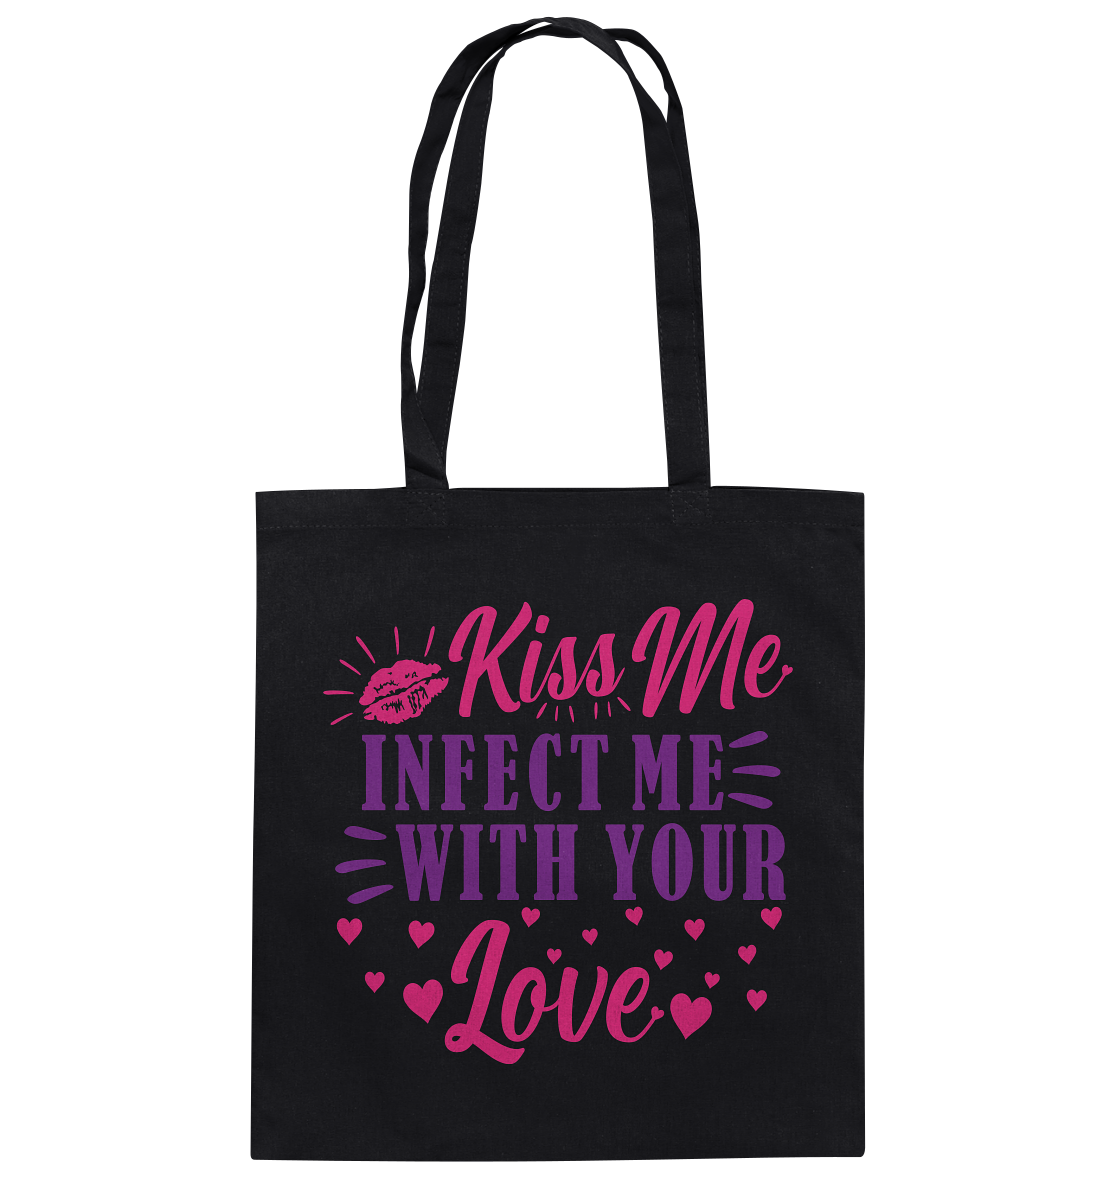 Kiss me infect me with your love - Baumwolltasche